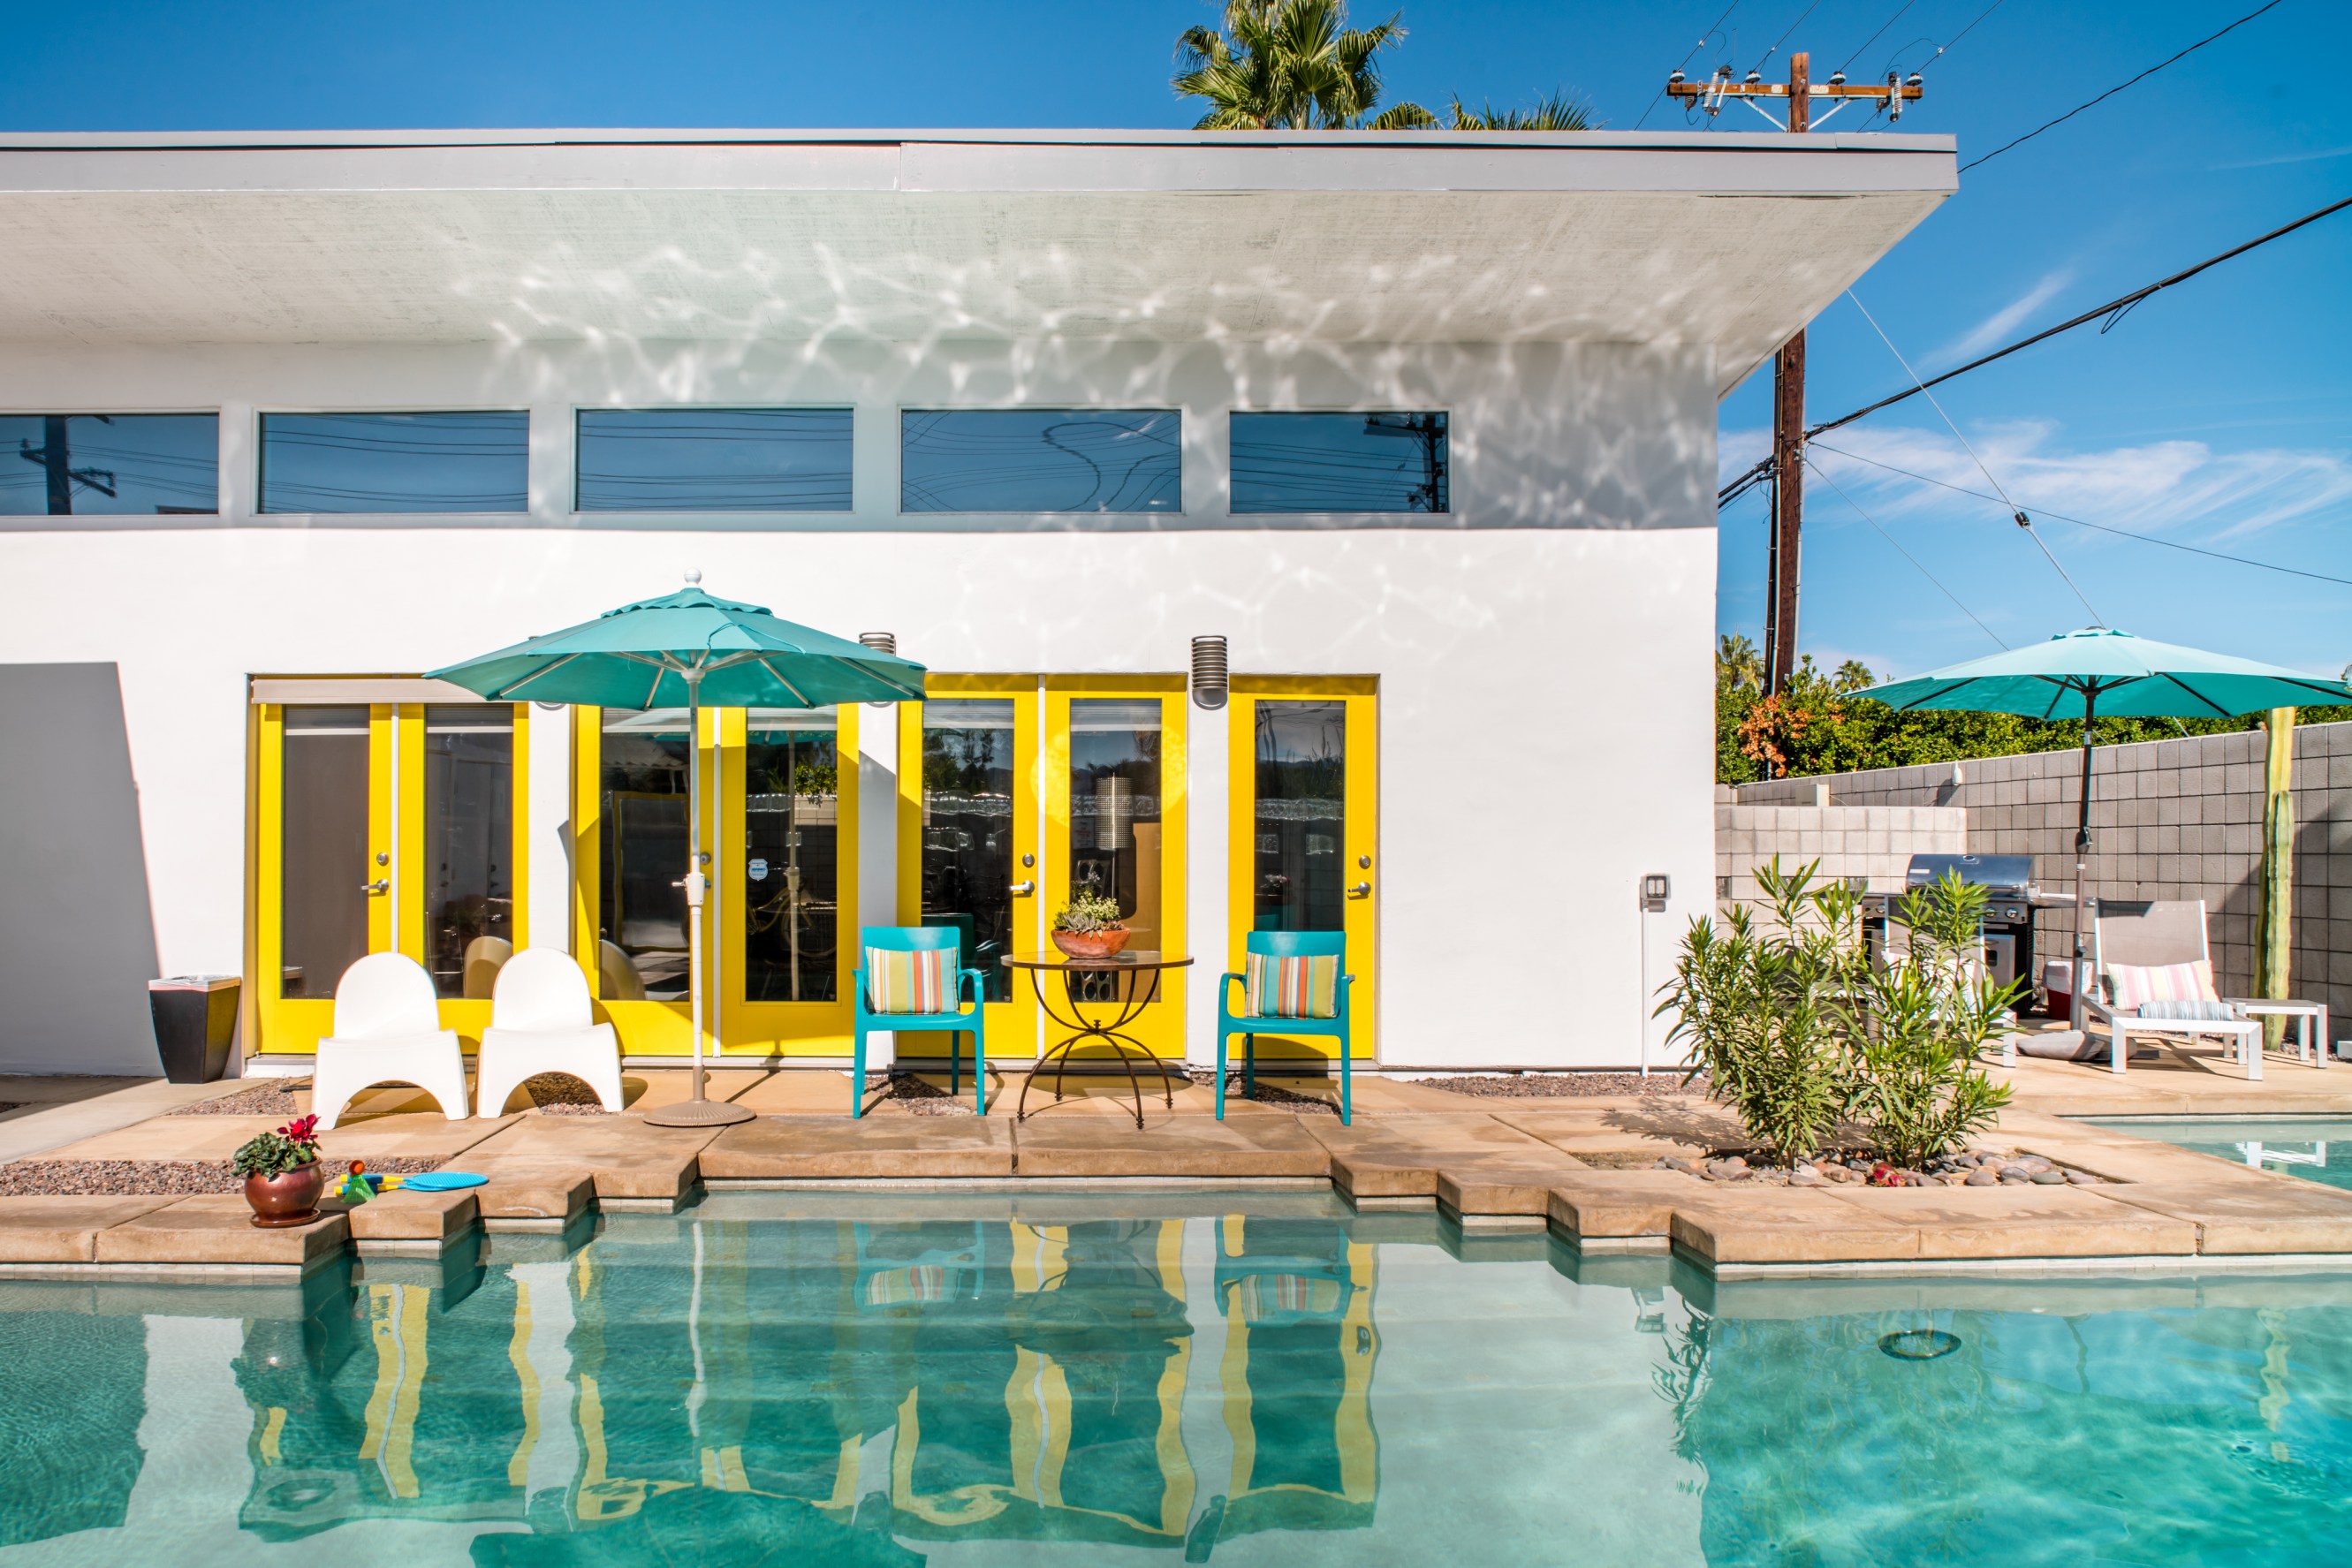 Relax Poolside at a Colorful Oasis with a Dreamy Desert Vibe